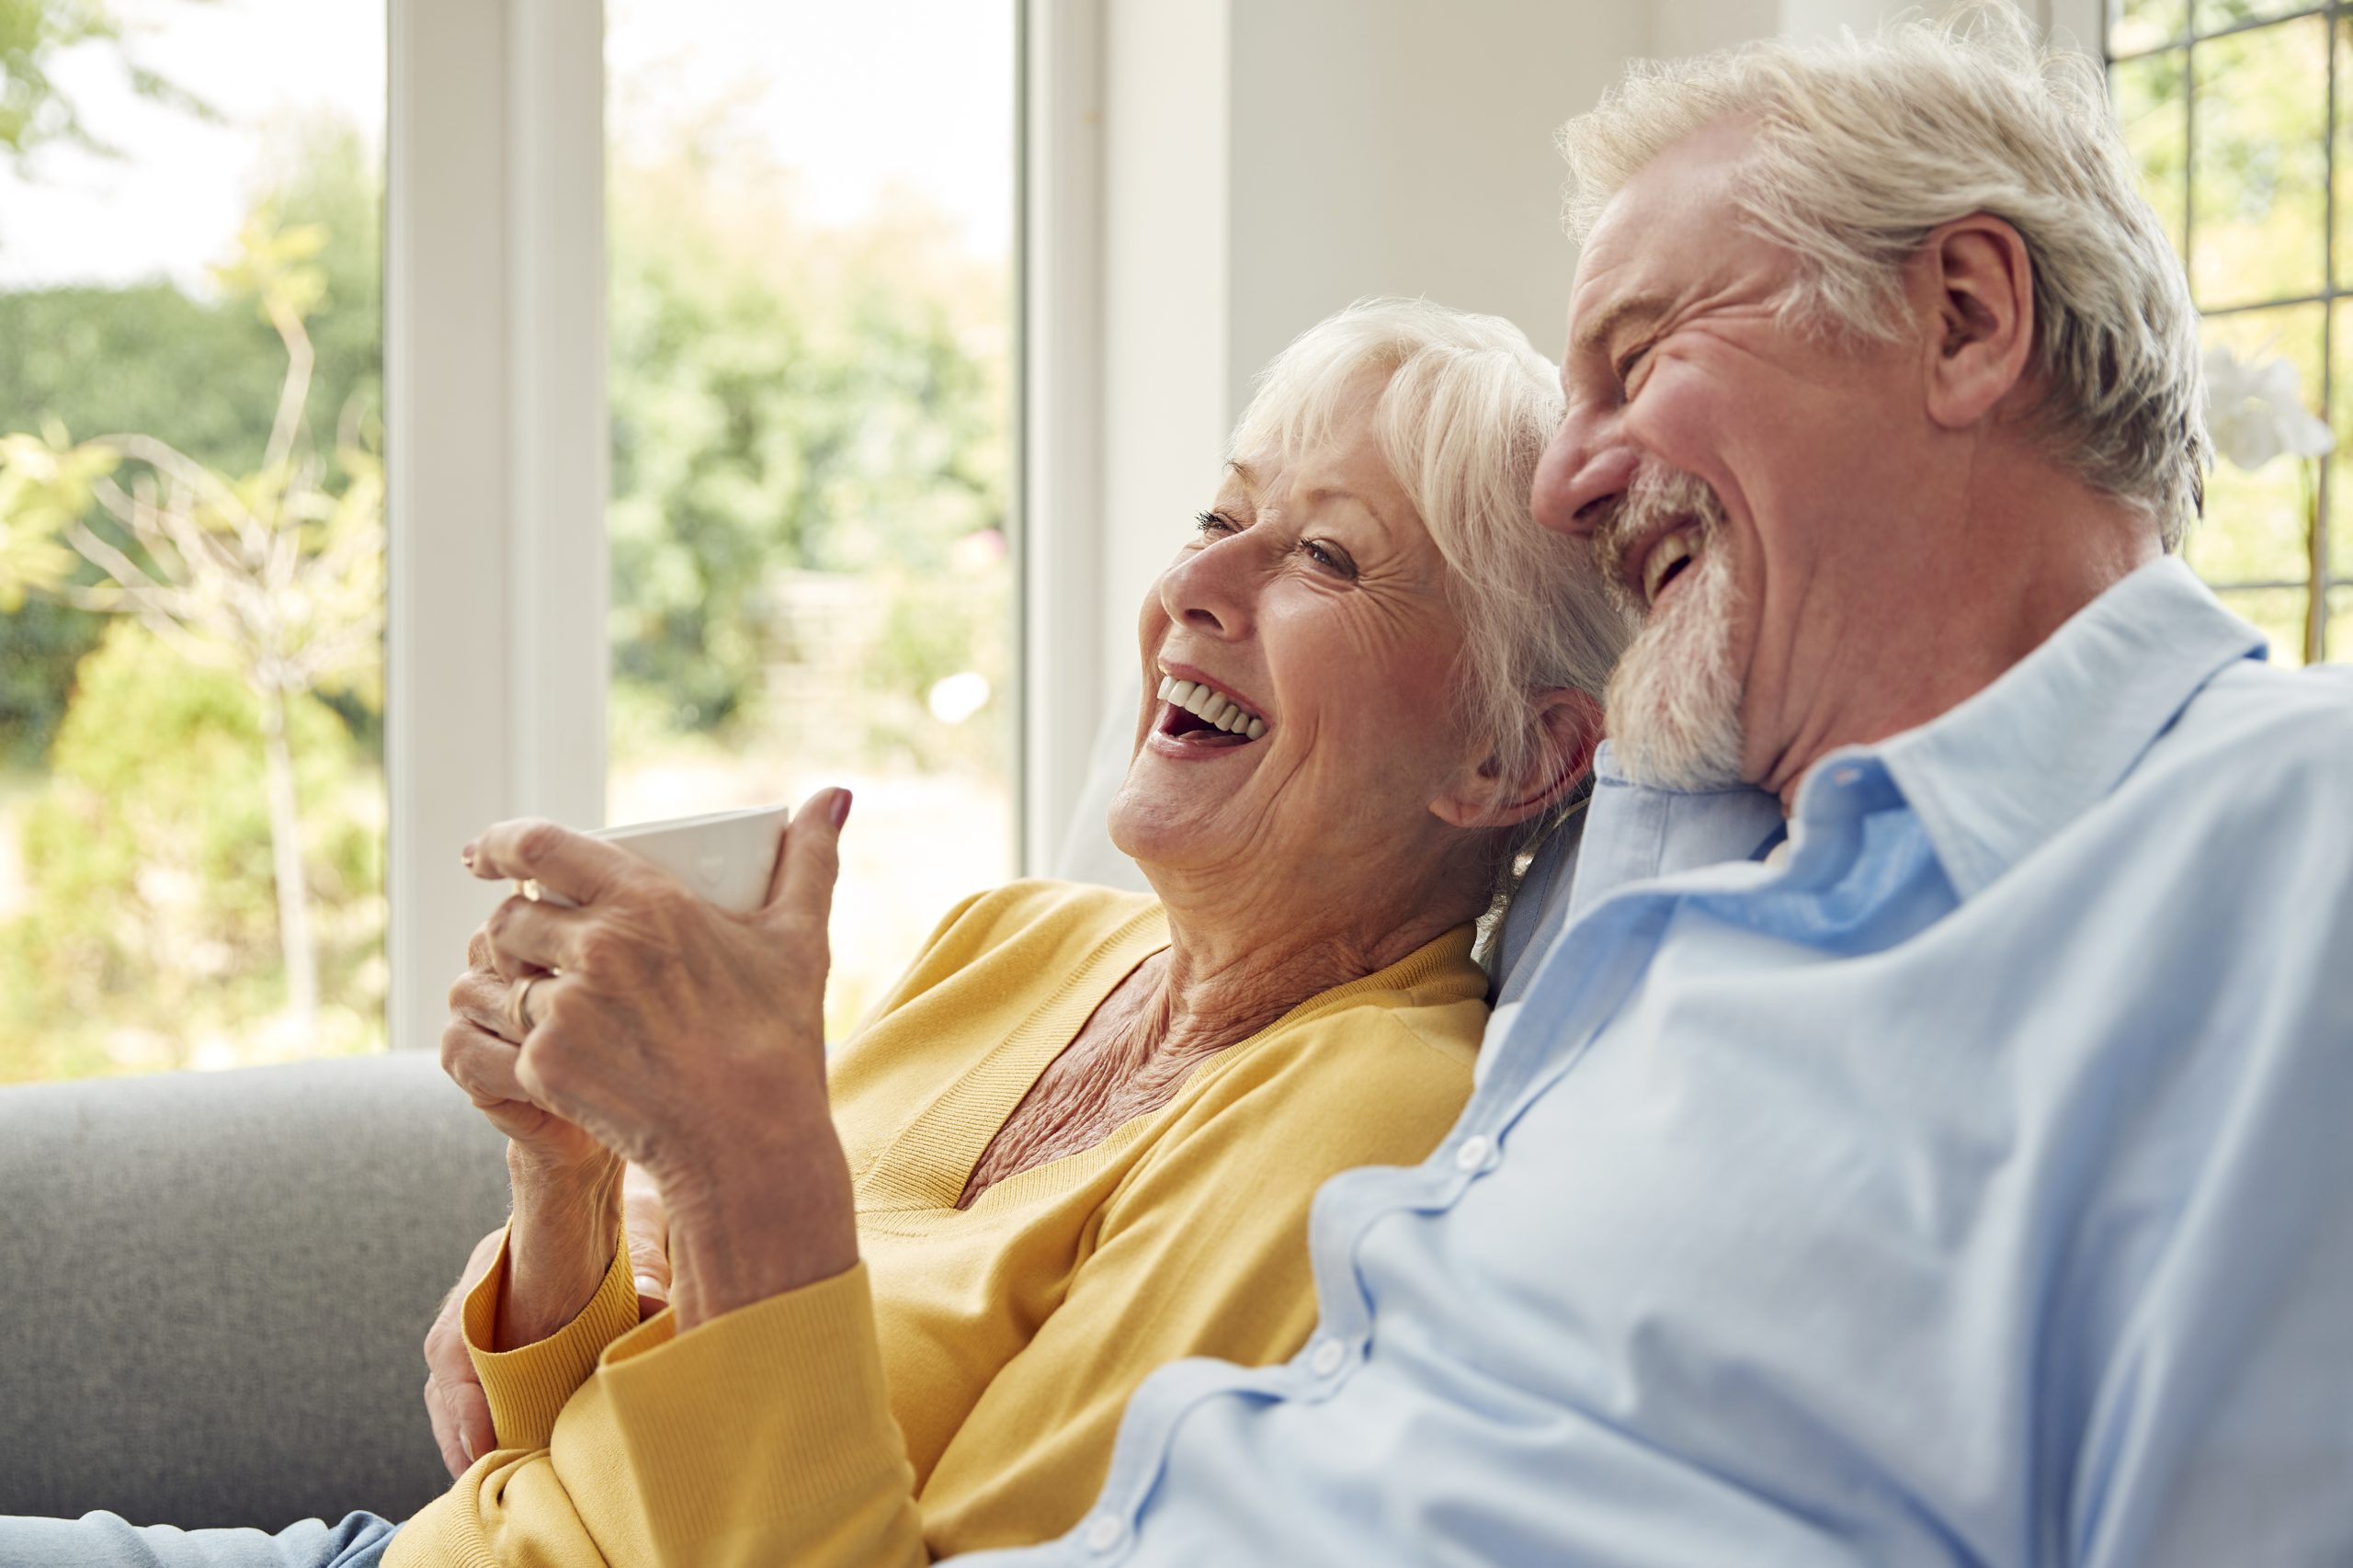 An older couple sharing a joyful moment, sitting on a couch and laughing together.